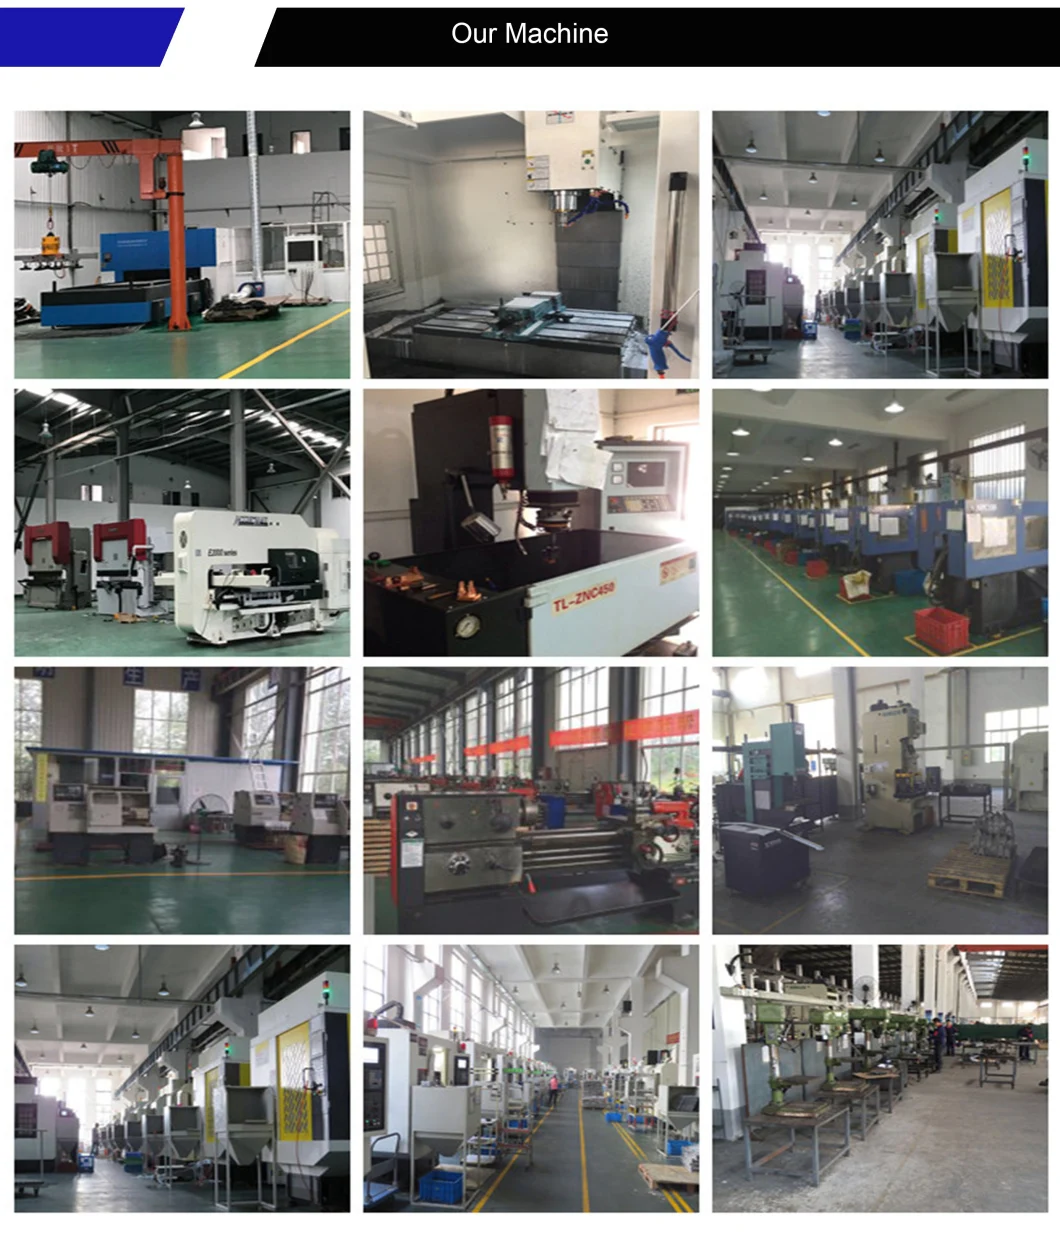 High Quality Metal Parts Supplier Stainless Steel CNC Machining Parts